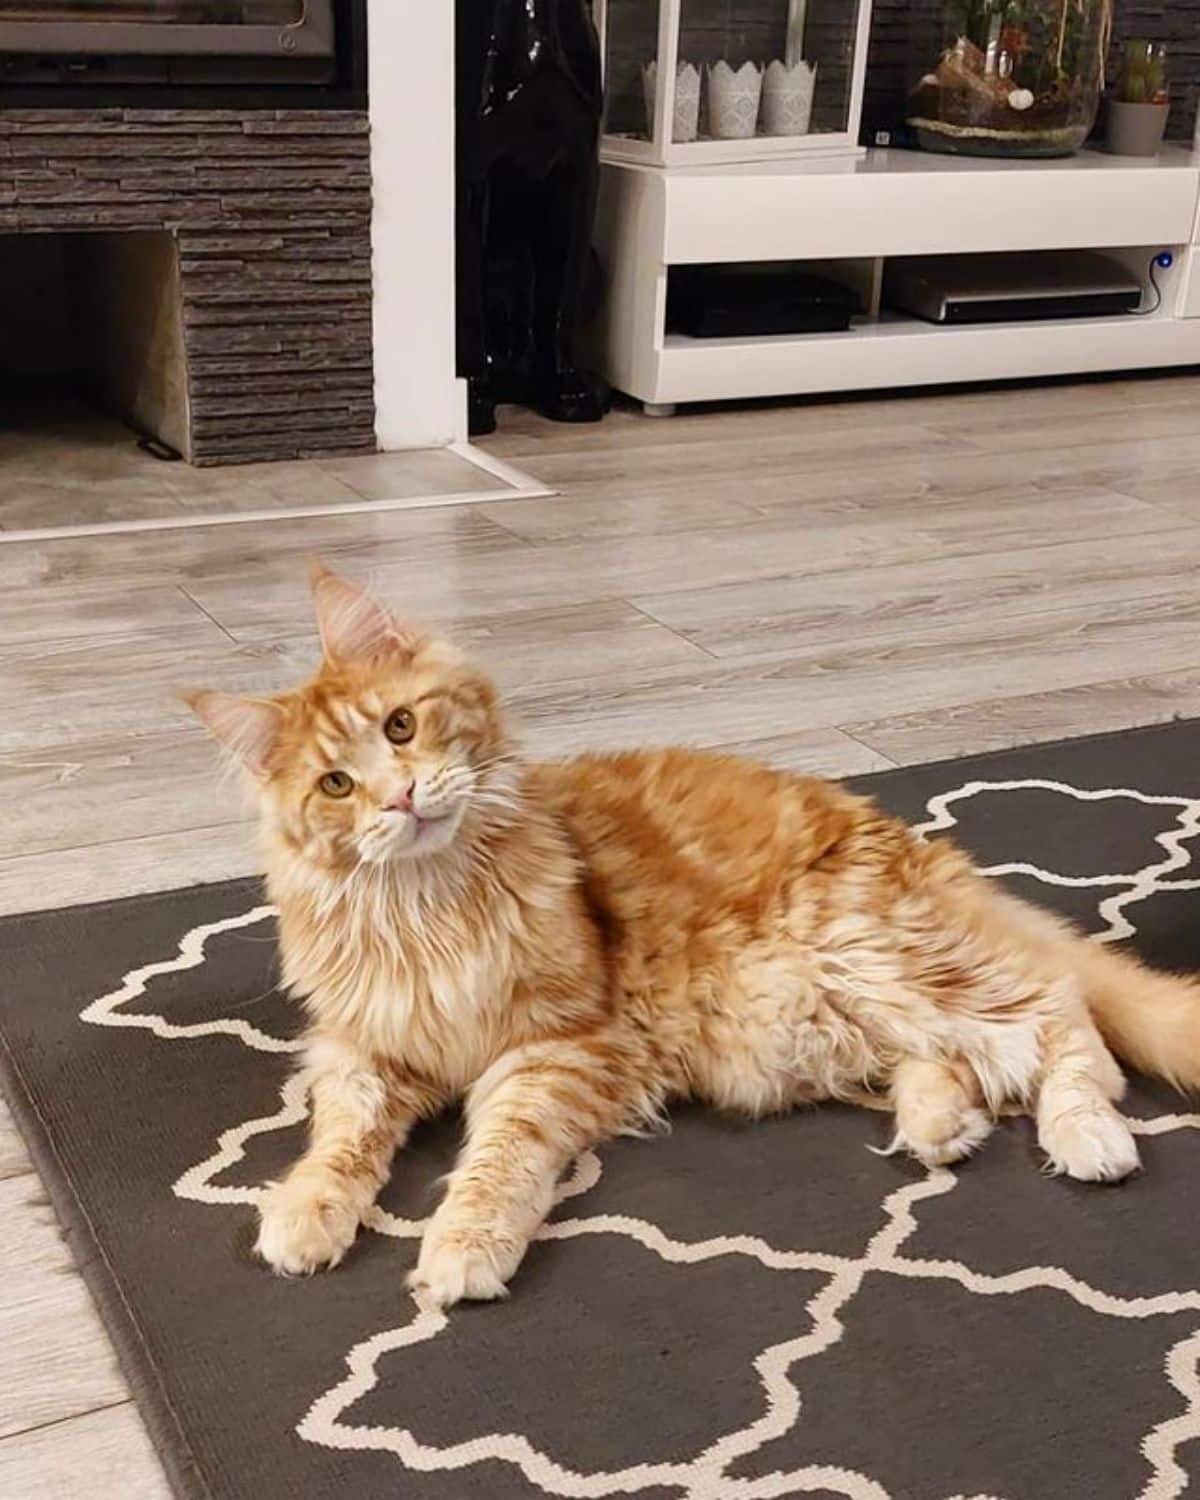 A ginger fluffy maine coon lying on a carpet.